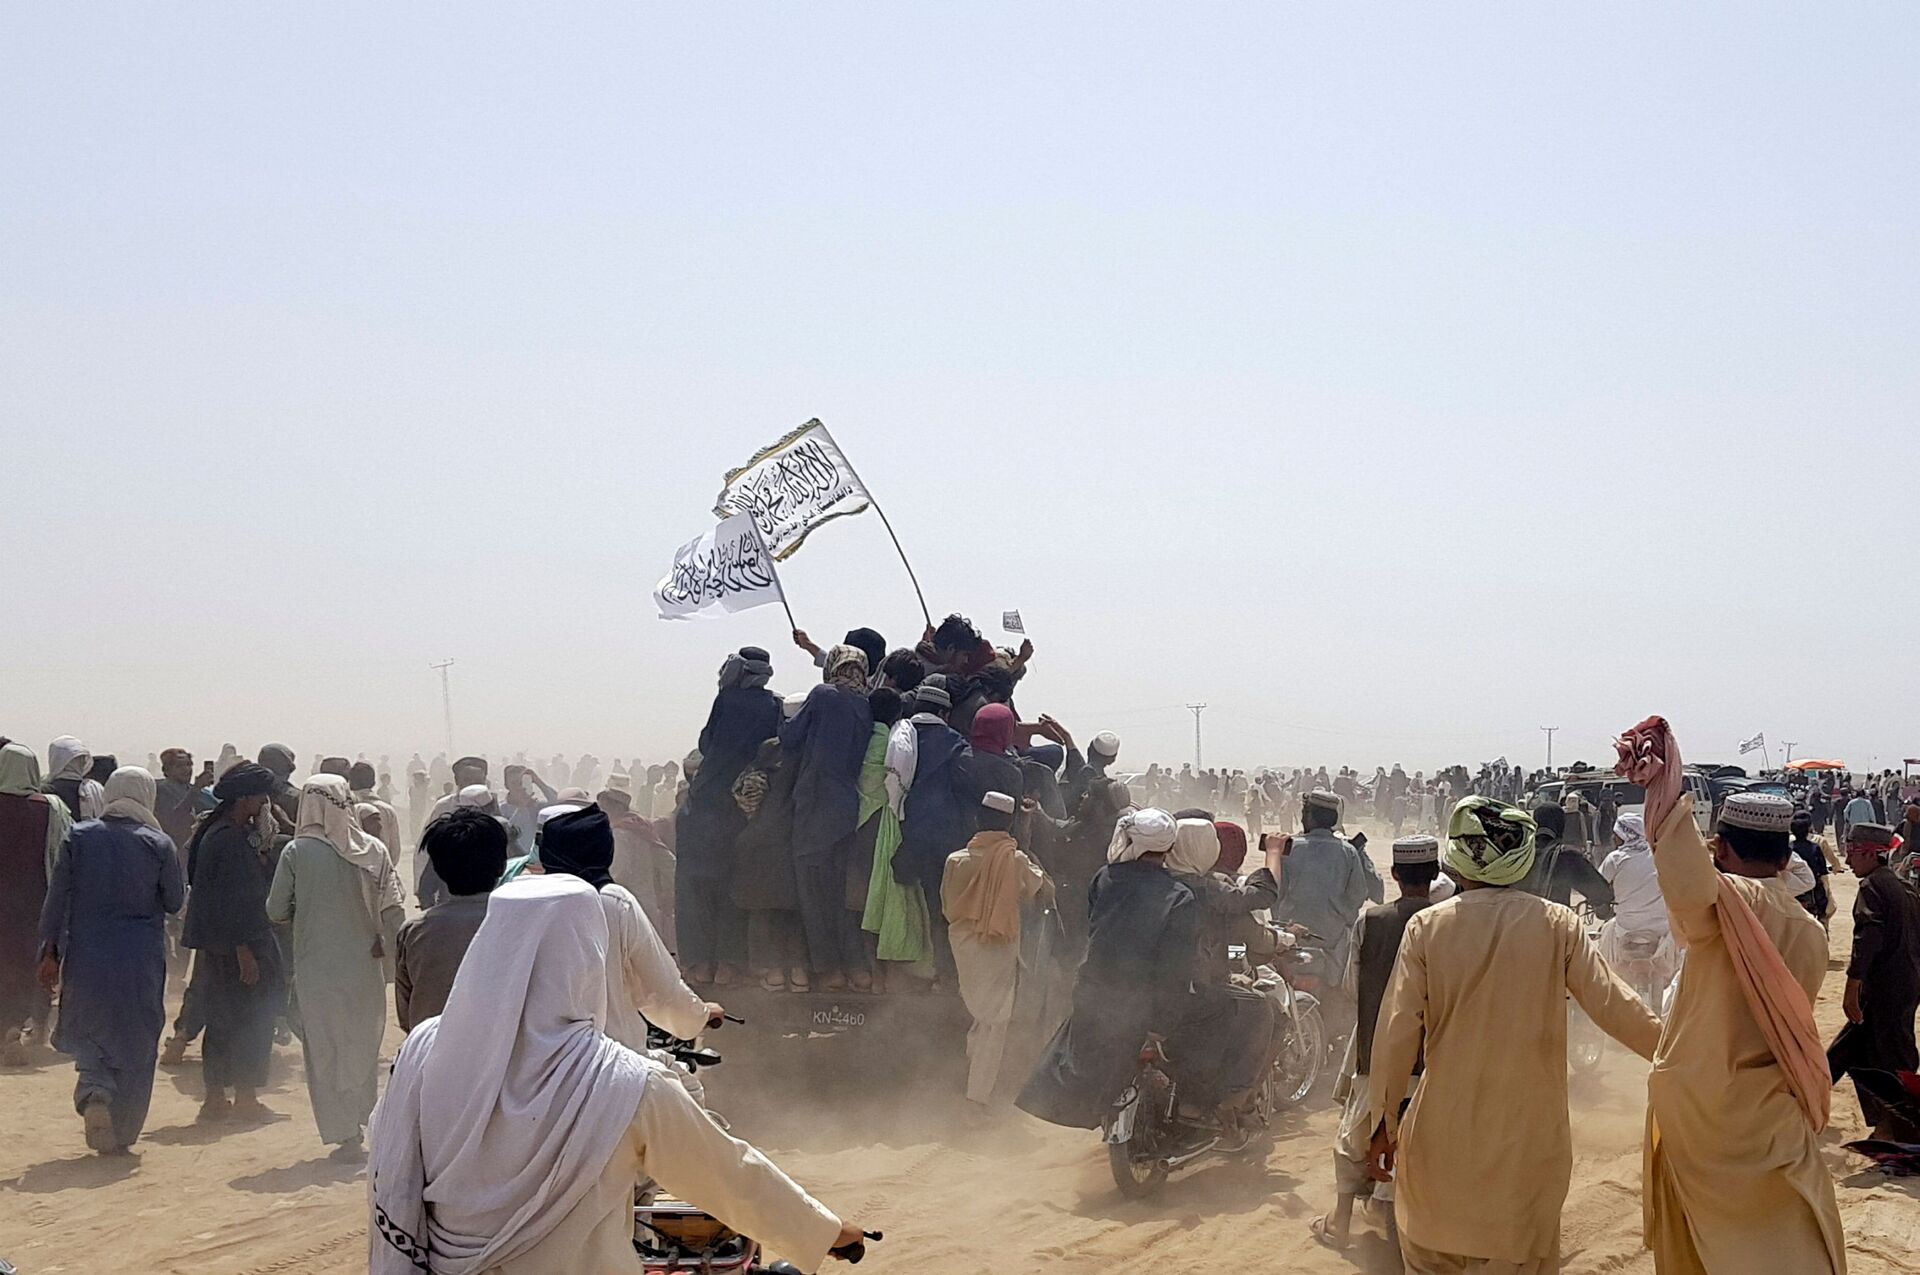 People standing on a vehicle hold Taliban flags as people gather near the Friendship Gate crossing point in the Pakistan-Afghanistan border town of Chaman, Pakistan July 14, 2021. Picture taken July 14, 2021. - Sputnik International, 1920, 07.09.2021